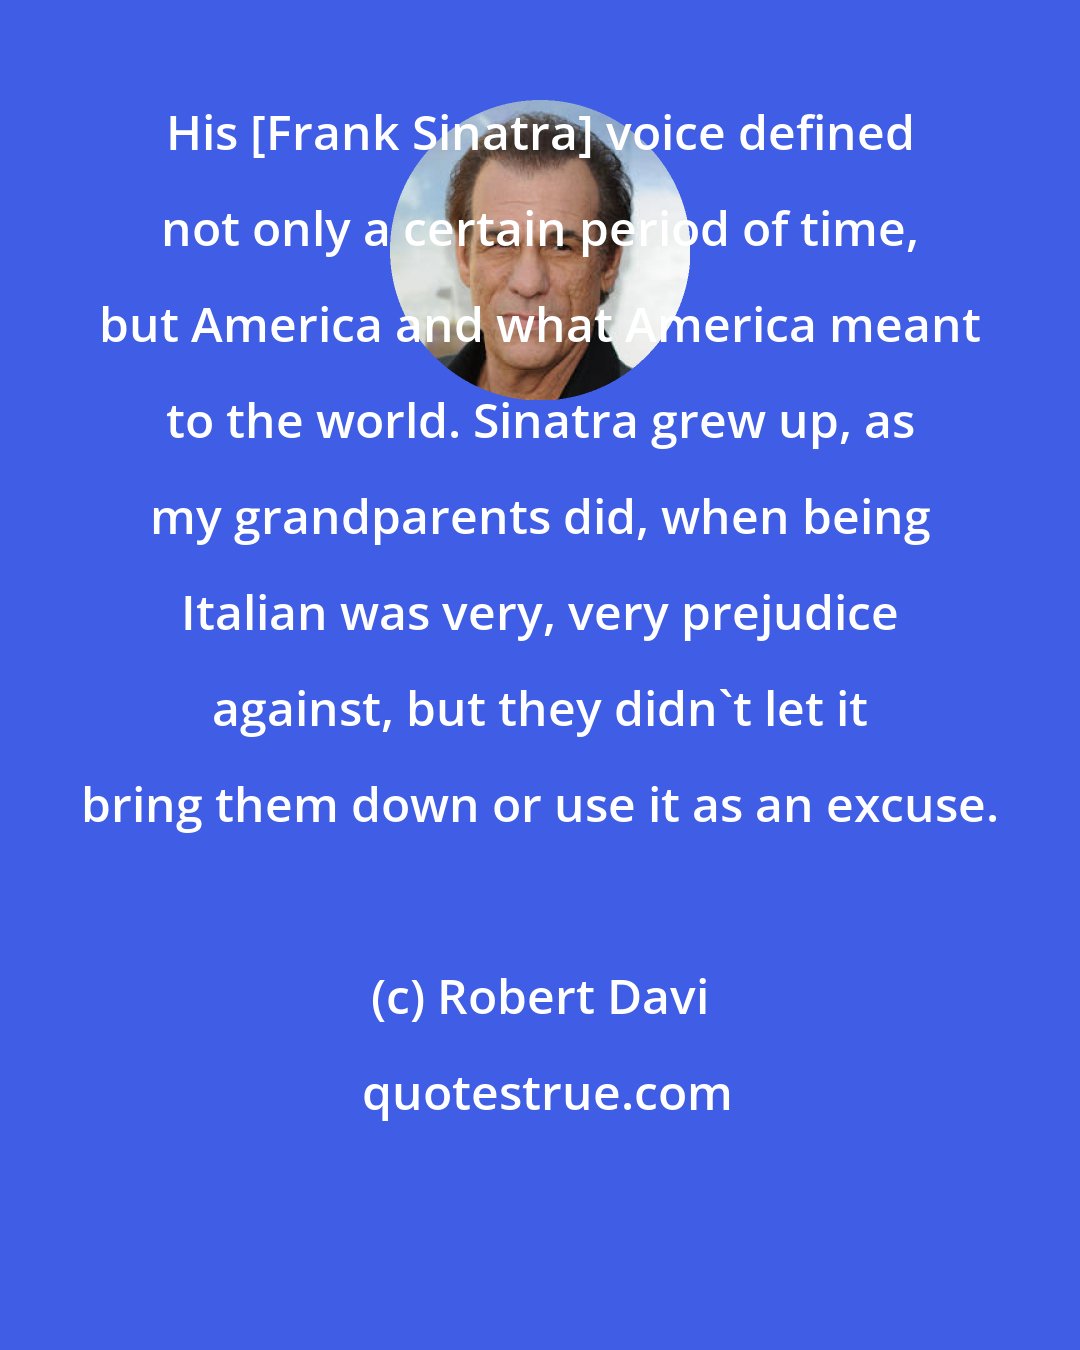 Robert Davi: His [Frank Sinatra] voice defined not only a certain period of time, but America and what America meant to the world. Sinatra grew up, as my grandparents did, when being Italian was very, very prejudice against, but they didn't let it bring them down or use it as an excuse.